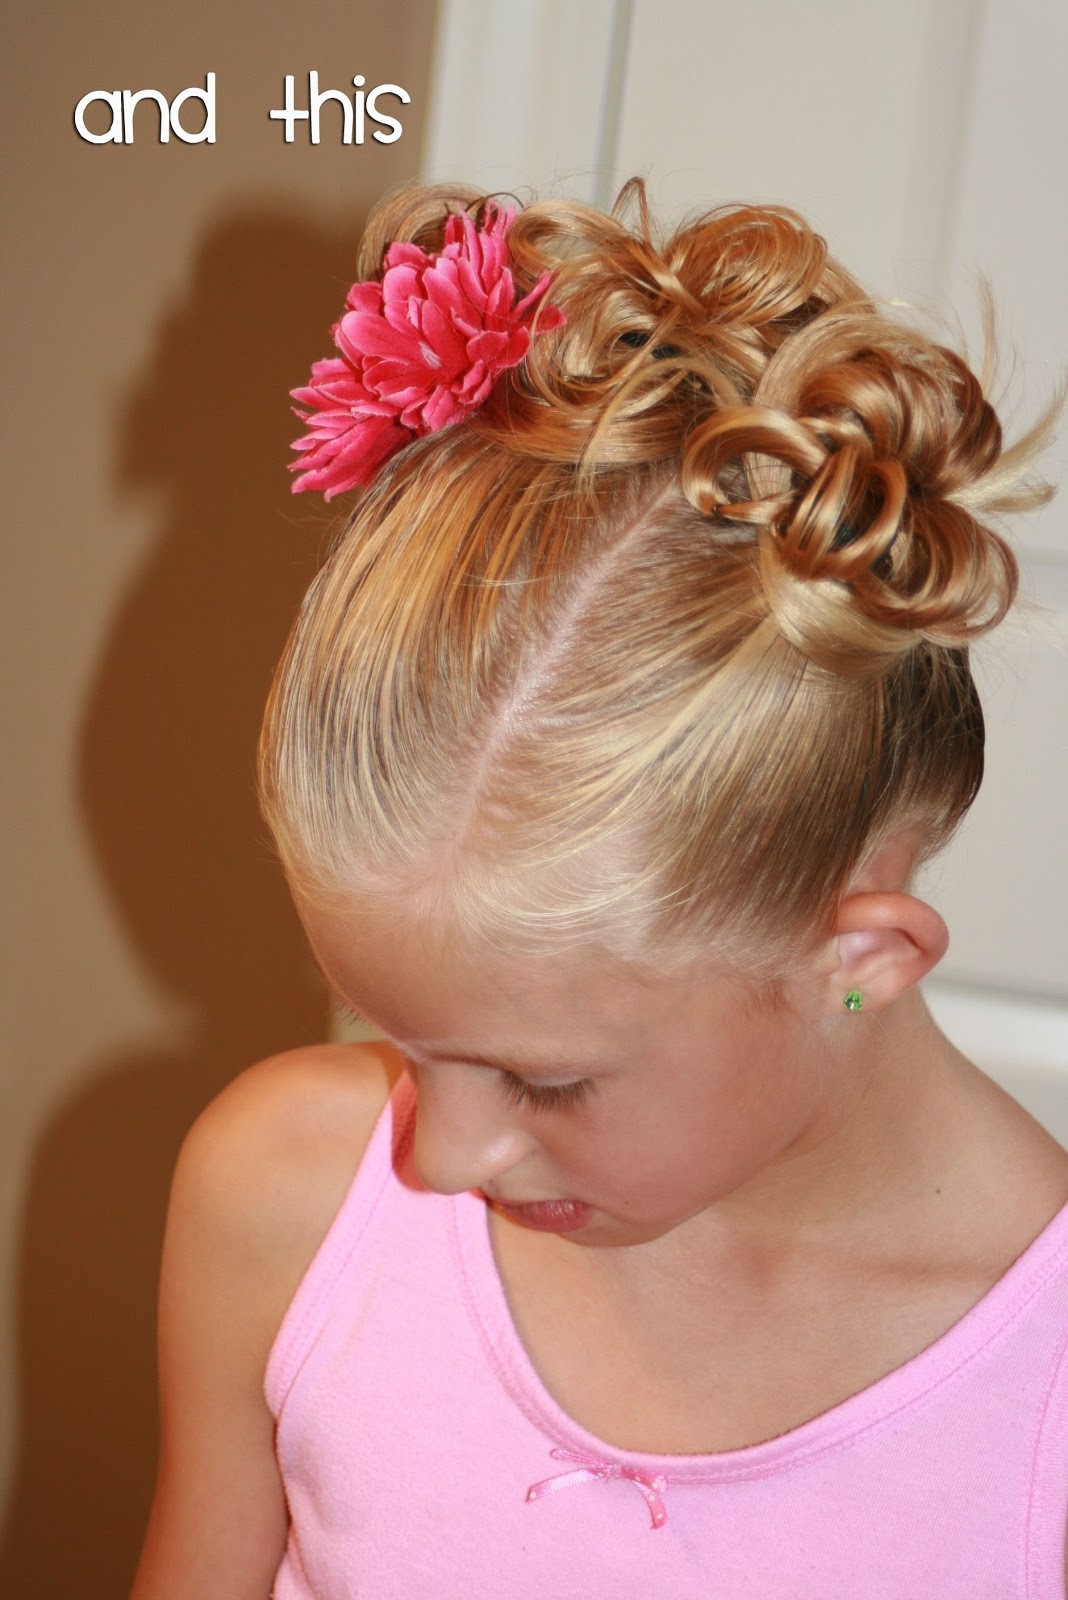 Images Of Little Girl Hairstyles
 Simple Hairstyles For Little Girls REASONS TO SKIP THE